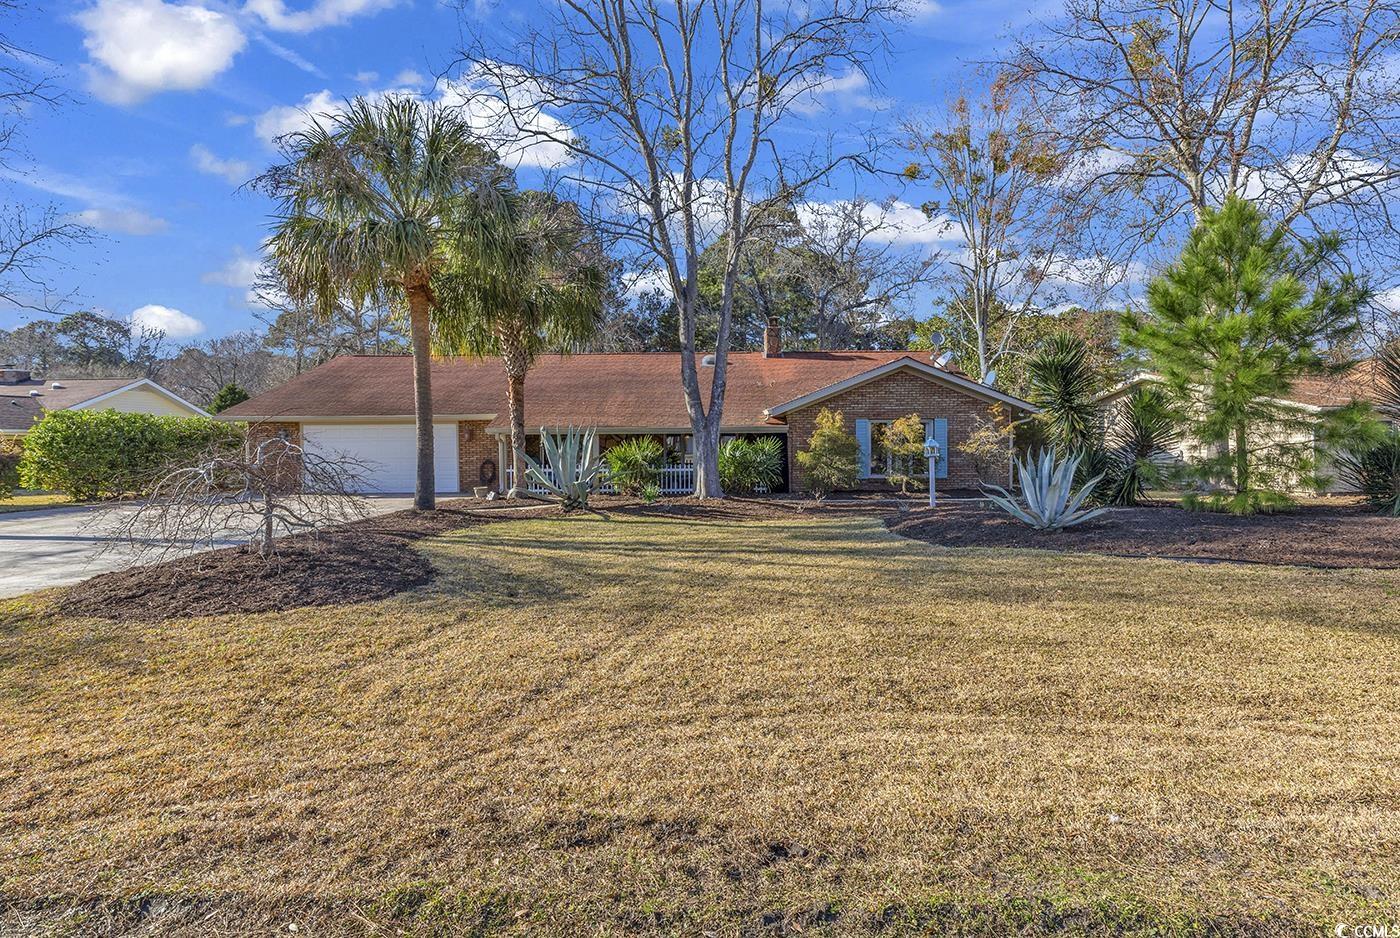 open house! join us this sunday, february 25, 2024 from 2:00 pm to 4:00 pm for an open house at 1580 gibson avenue in deerfield plantation. this 4100+ square foot home sits on a lakefront .34 acre lot and offers 4 bedrooms, 3 bathrooms, office, game room, flex room, and a true mother in law suite. you have to see this gorgeous home today! incredible opportunity now available in deerfield! where do we begin to list the amazing features of this unique home? as you pull in the driveway you will appreciate plenty of parking and a beautifully manicured lawn leading to the relaxing covered front porch with magnetic screens for convenience during the summer. entering this 4100+ square foot home, you will notice a large living room with beautiful stone fireplace. continue down the hallway from the foyer to the primary suite, outfitted with a large walk-in closet, and spacious bathroom with two vanities and a new standing shower. you'll find the second bedroom, also offering a large walk-in closet and another full bathroom with new shower/tub combo. traveling past the living room, you'll notice the spacious office with large windows overlooking the covered front porch. the formal dining room flows into a second dining area that the current sellers are using as an office and market pantry area. the kitchen is stunning, with fresh cabinetry, granite counters, stainless steel appliances, tile backsplash and two pantry areas. the giant game room is ready for fun with a pool table, bar area, and new french doors leading to the backyard. there is also another flex room with a washer and dryer beside the game room. past the kitchen, the home offers up multi-generational living with two additional living quarters. there is a true mother-in-law suite offers its own entrance with full kitchen, living room, and a bedroom. a second set washer and dryer and full bathroom with standing shower are also part of this section of the home. don't miss the fourth bedroom with spacious bonus room (currently used as a walk-in closet and dressing area) and its own entrance and exit to the backyard. the backyard is functional and a true oasis. this large lot provides a fenced area, perfect for pets, and a patio, perfect for enjoying summer evenings. the peaceful lake in the backyard offers privacy and serenity. the updates and features the home offers are too many to list, make sure to ask to see the list of updates and upgrades available. deerfield is in the highly sought after socastee school district and well loved family beach of surfside beach. with plenty of dining, entertainment, and some of the best beaches on the grand strand, you'll love living in this tremendous neighborhood. check out the virtual 3d tour and schedule your appointment to see this home today!